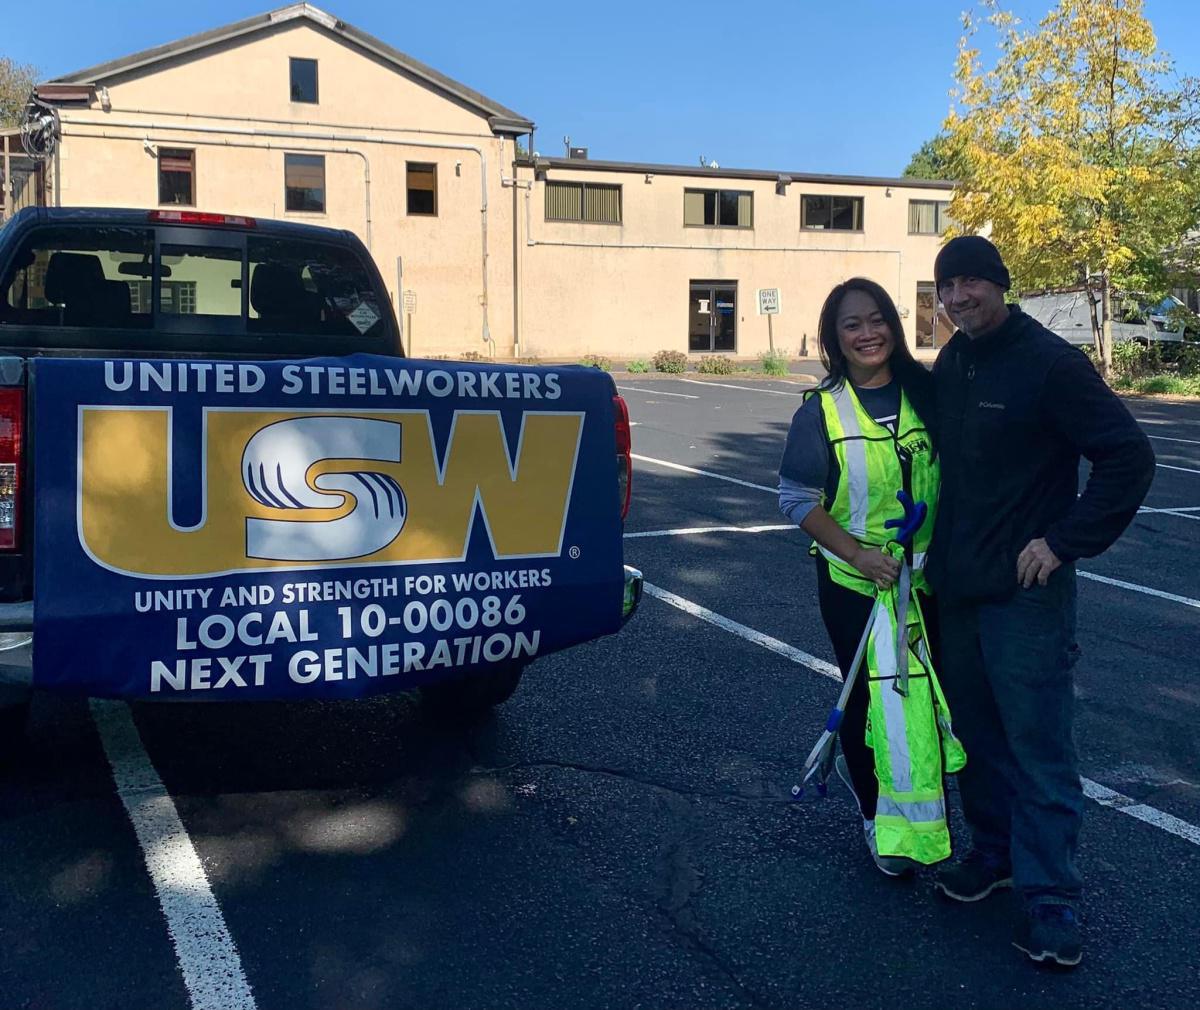 USW Next Generation Roadside Cleanup.